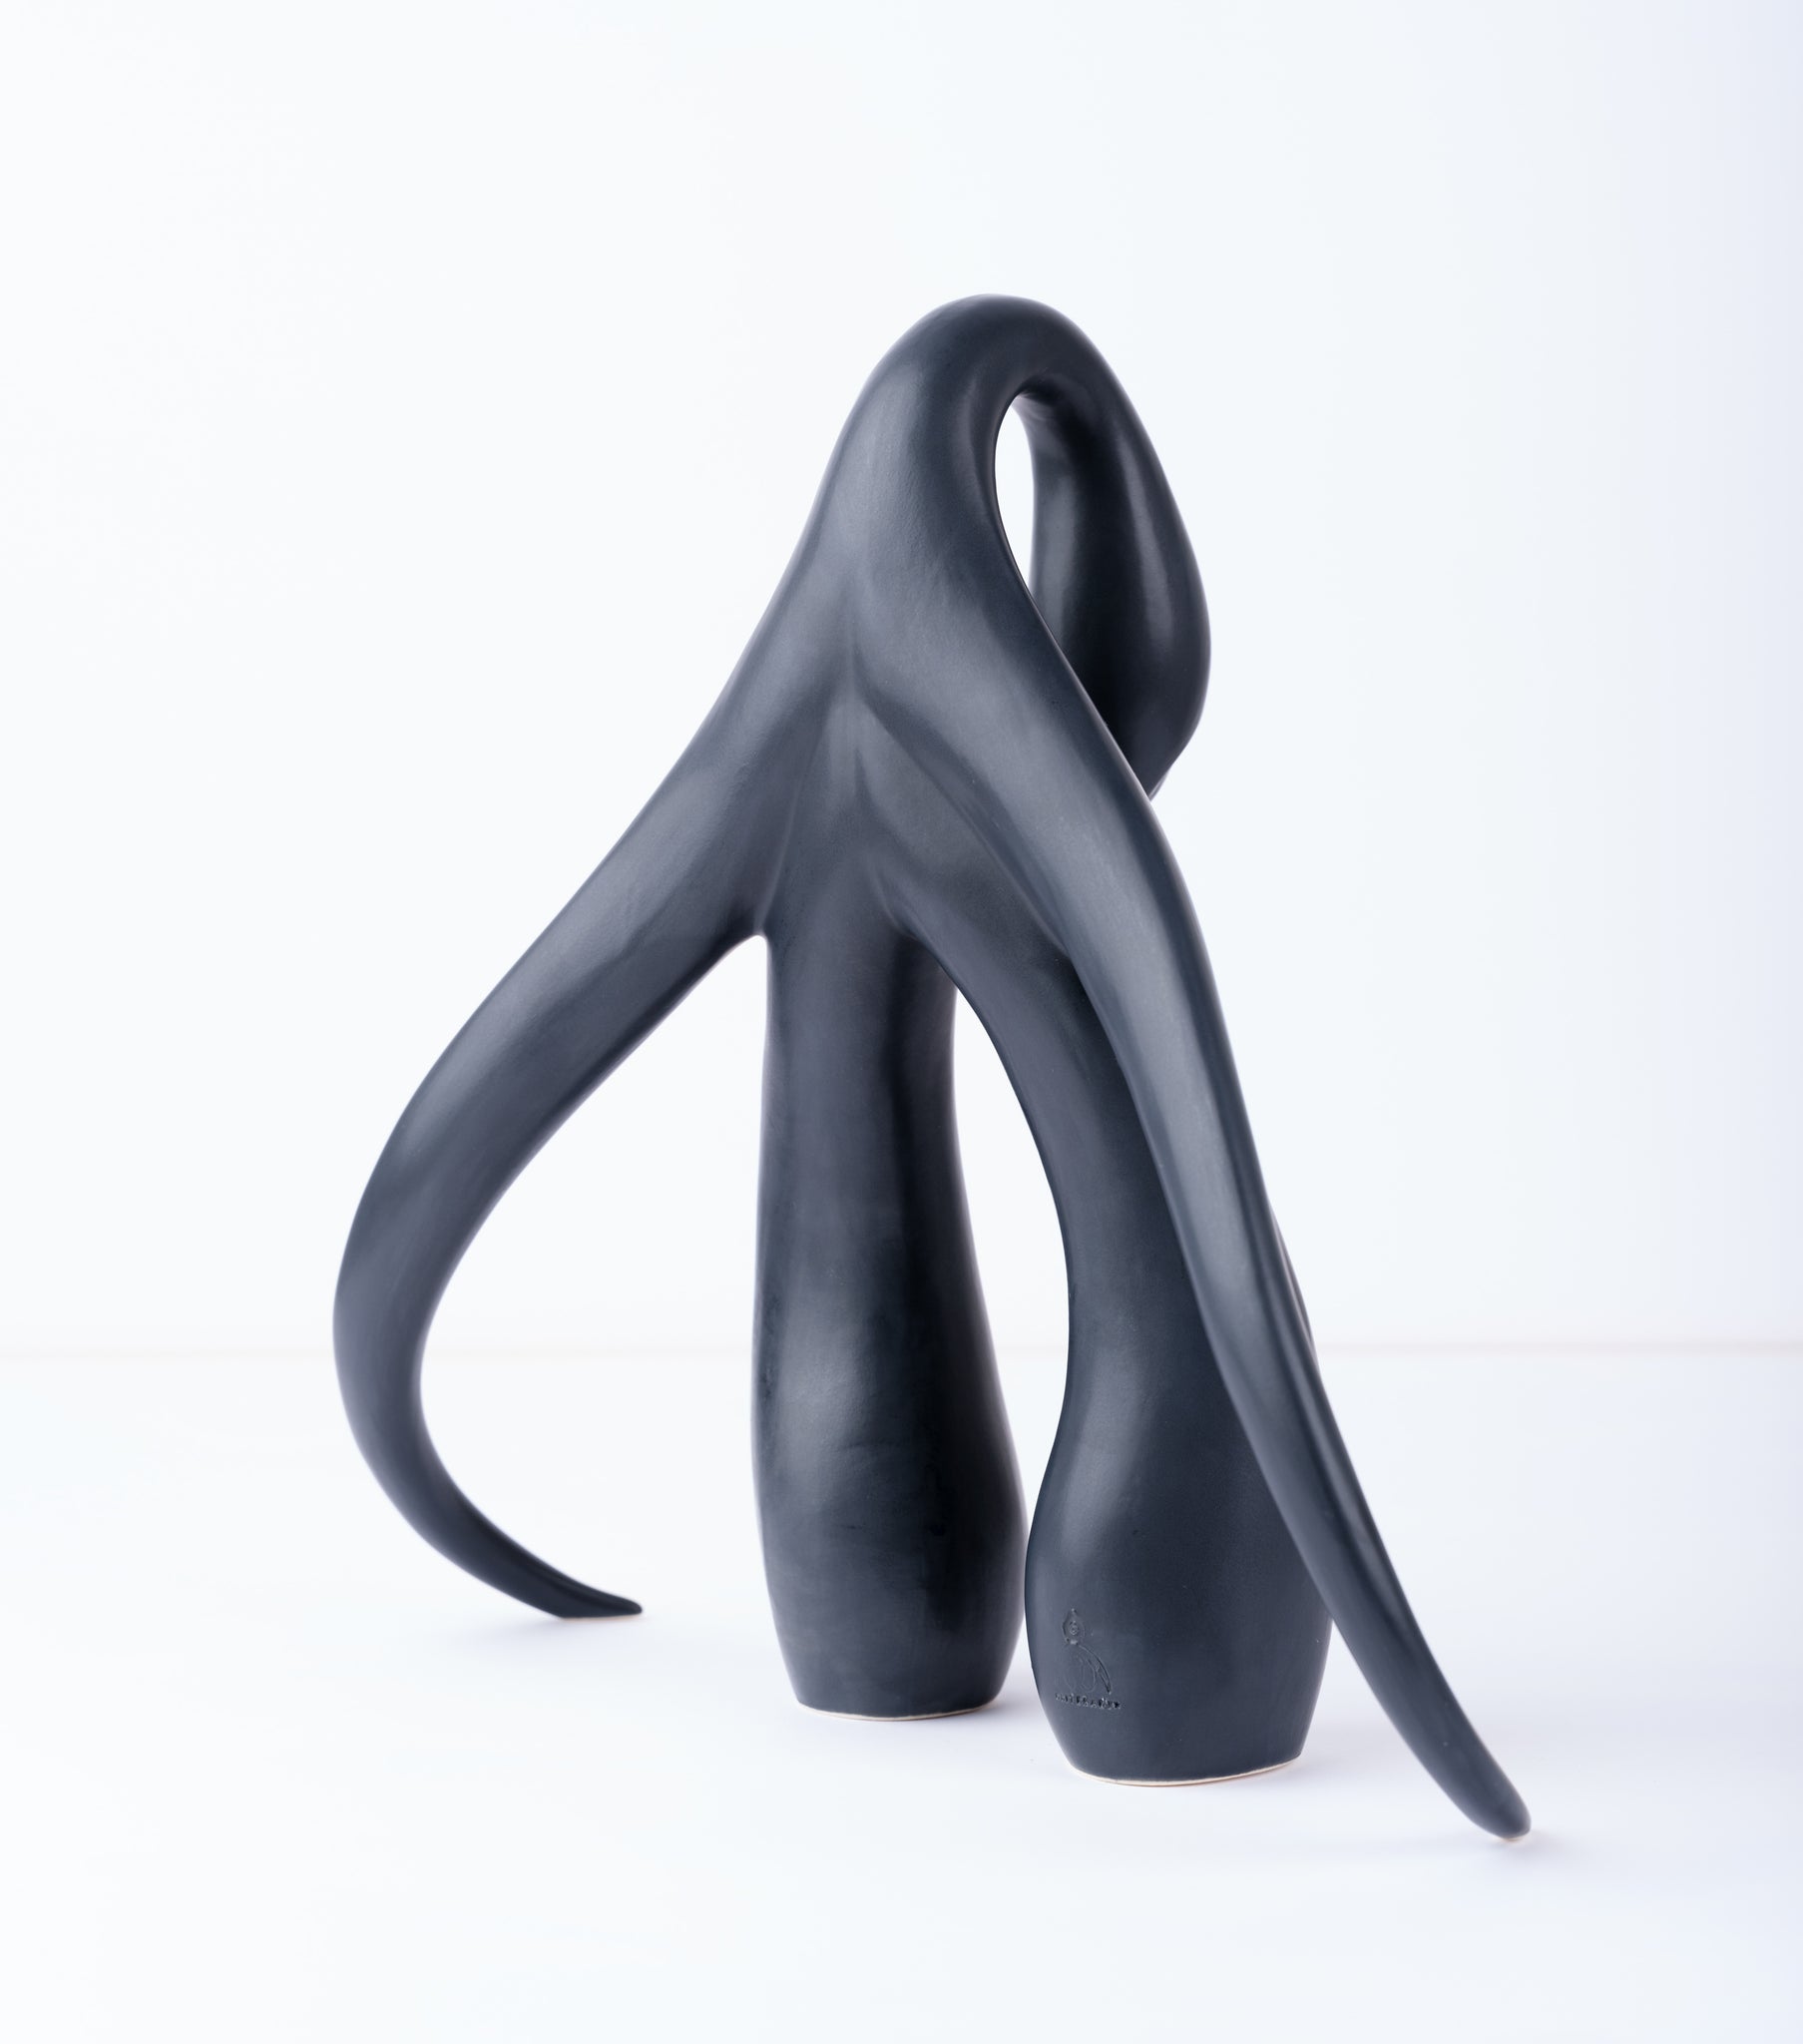 3/4 back view of "Swan Series" ceramic sculpture in matte black by Sophia Wallace, 2022.